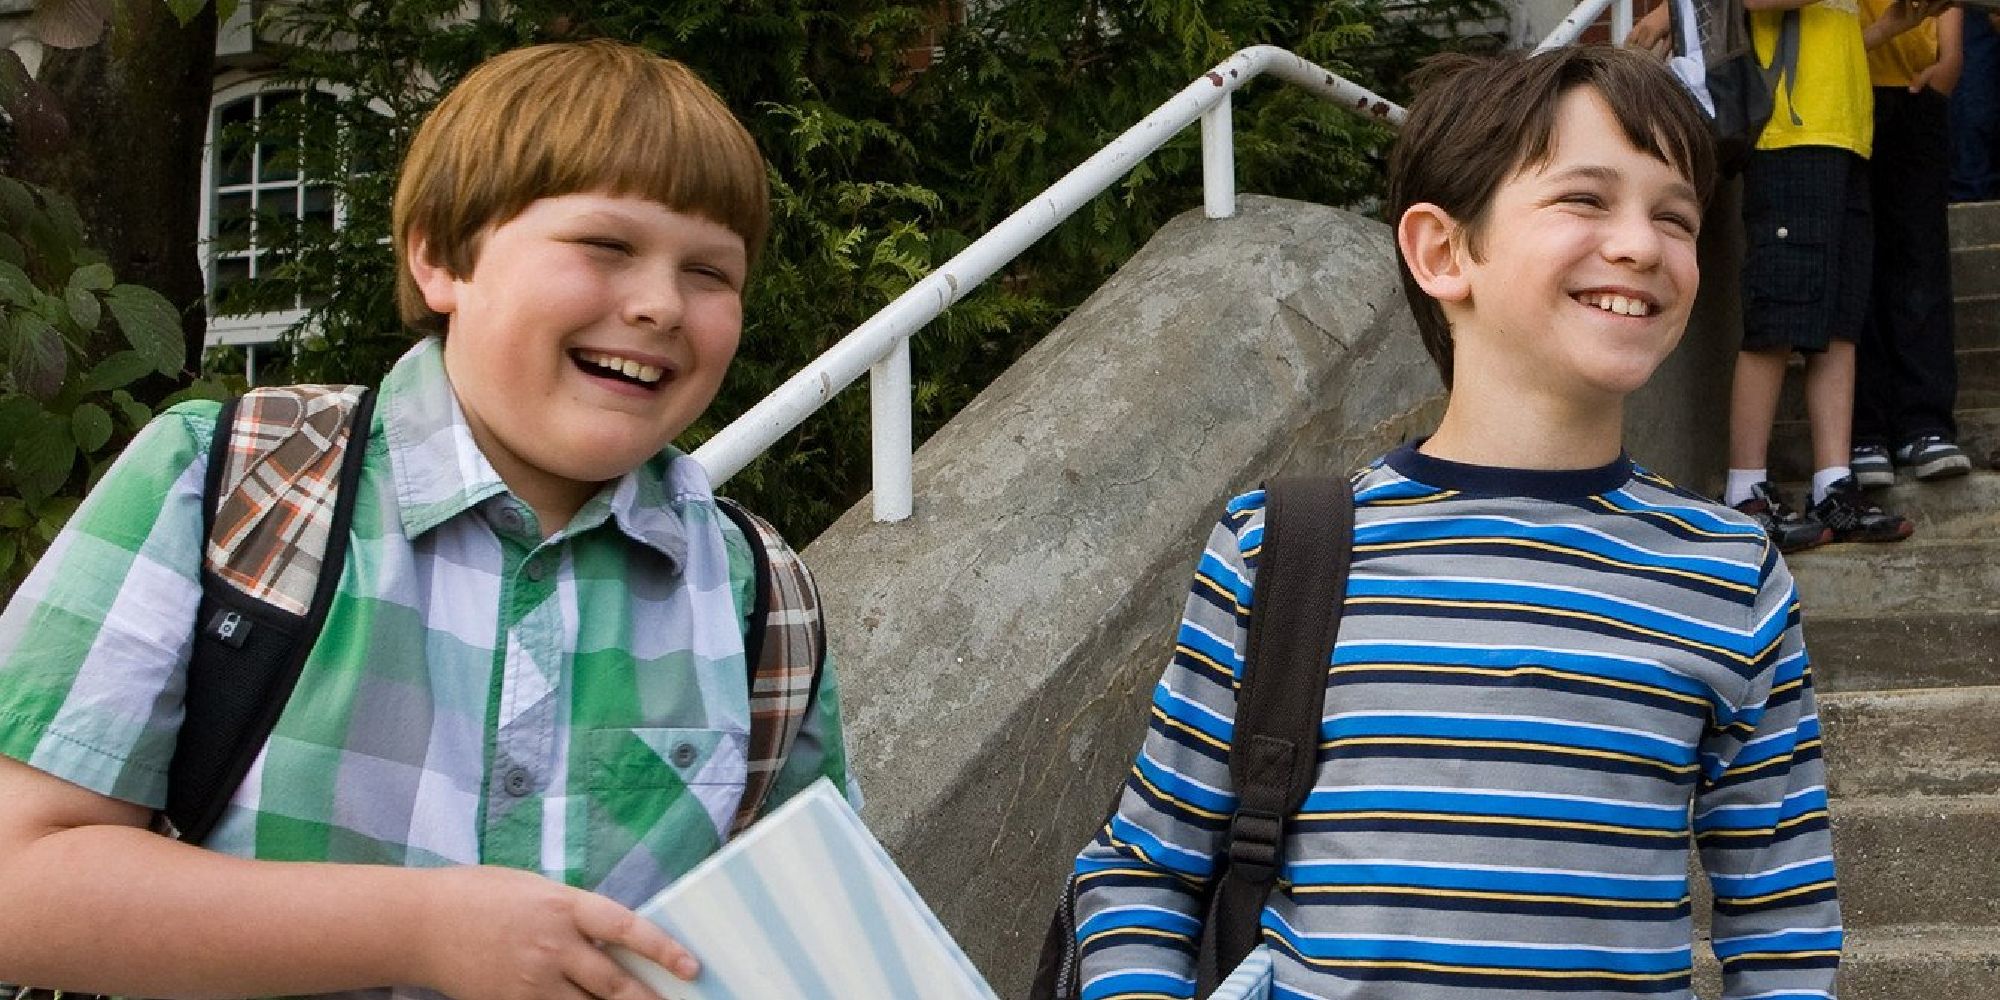 Greg and Rowley holding their middle school yearbooks in Diary of a Wimpy Kid